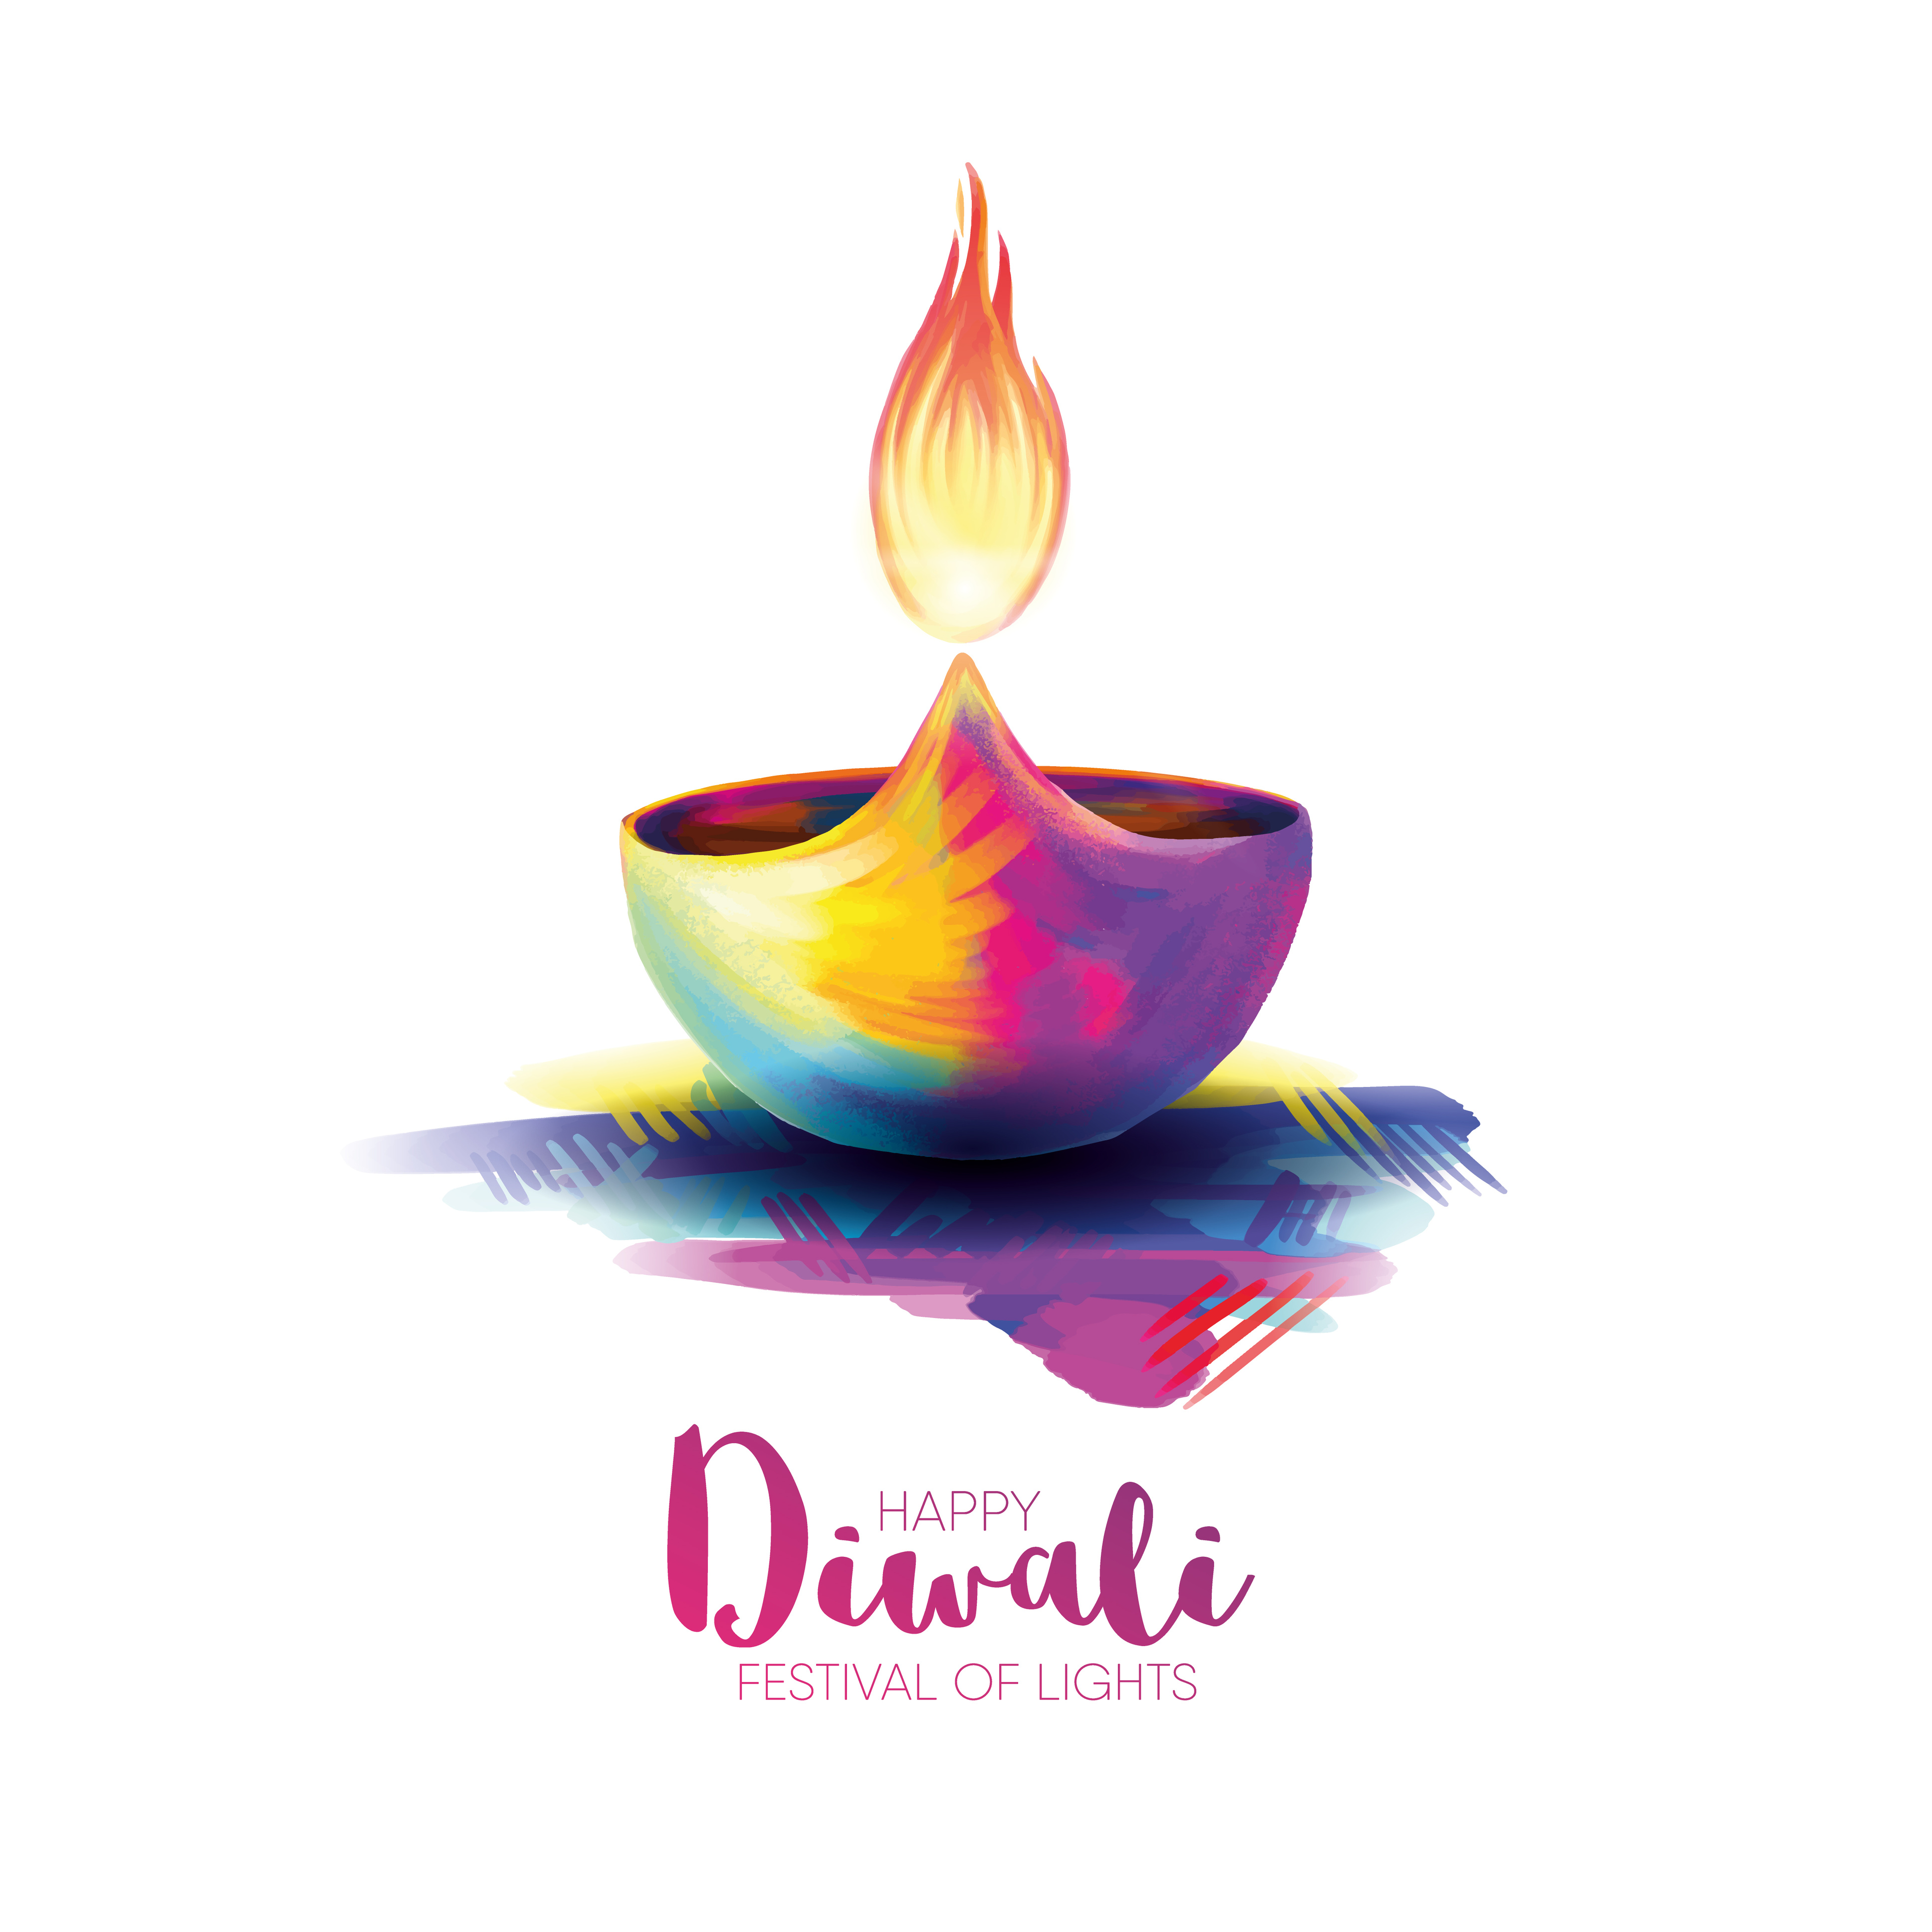 A colorful painted-style diya with the caption "Happy Diwali Festival of Lights"